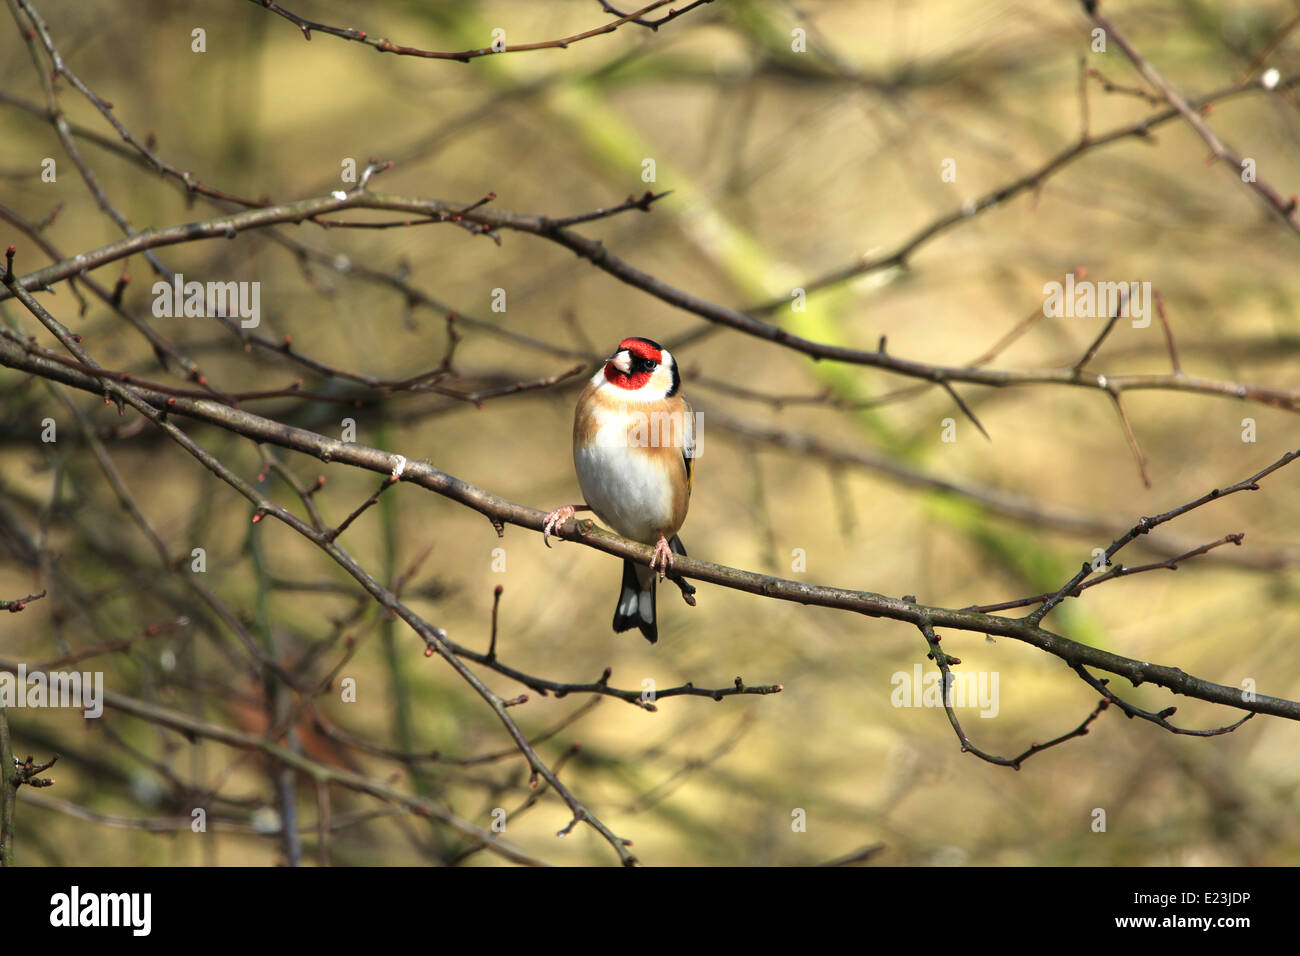 European Goldfinch sitting on a branch Stock Photo